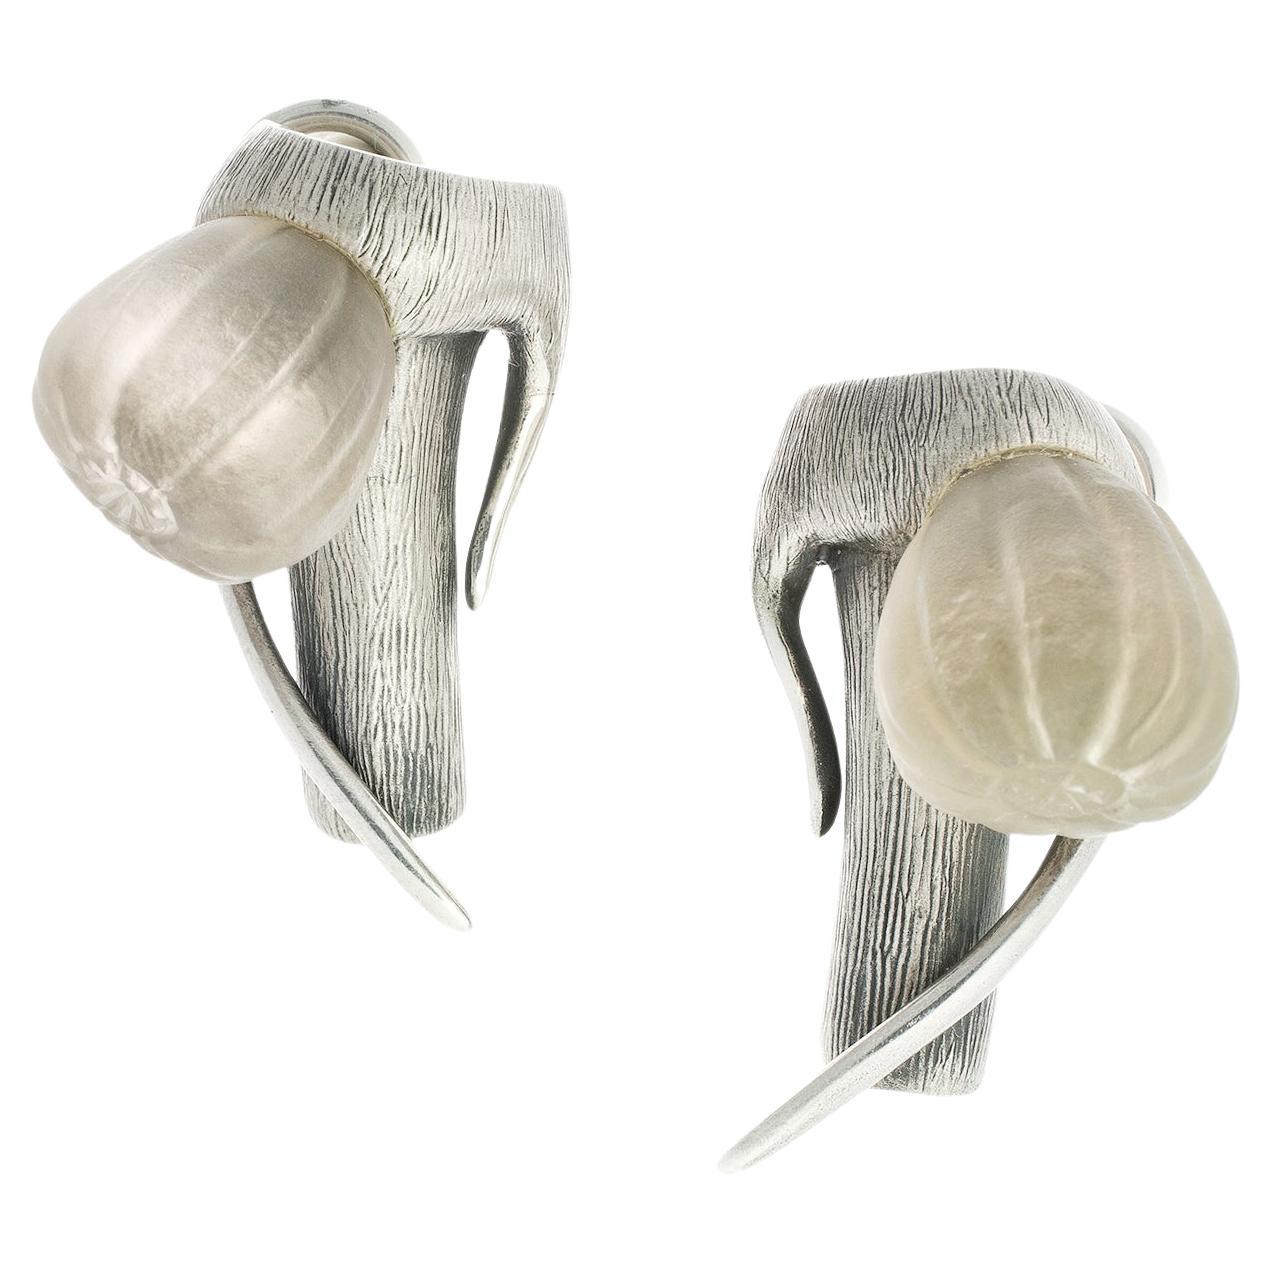 Mediterranean Resort Fig Stud Earrings in Silver with Quartzes by the Artist